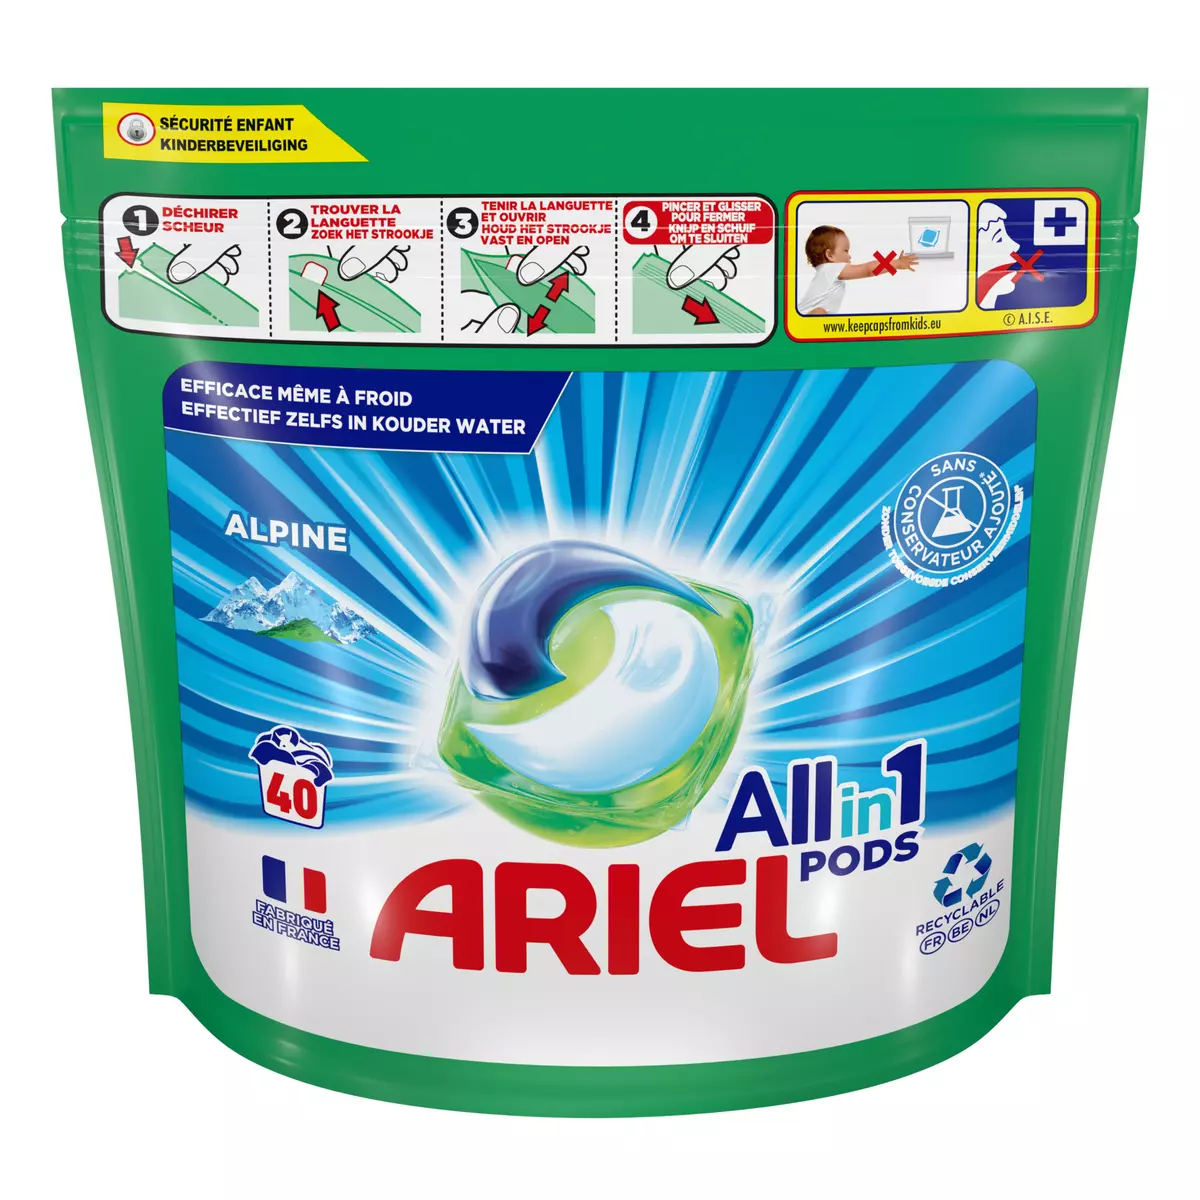 ARIEL Lessive en capsules All-in-one Pods Color